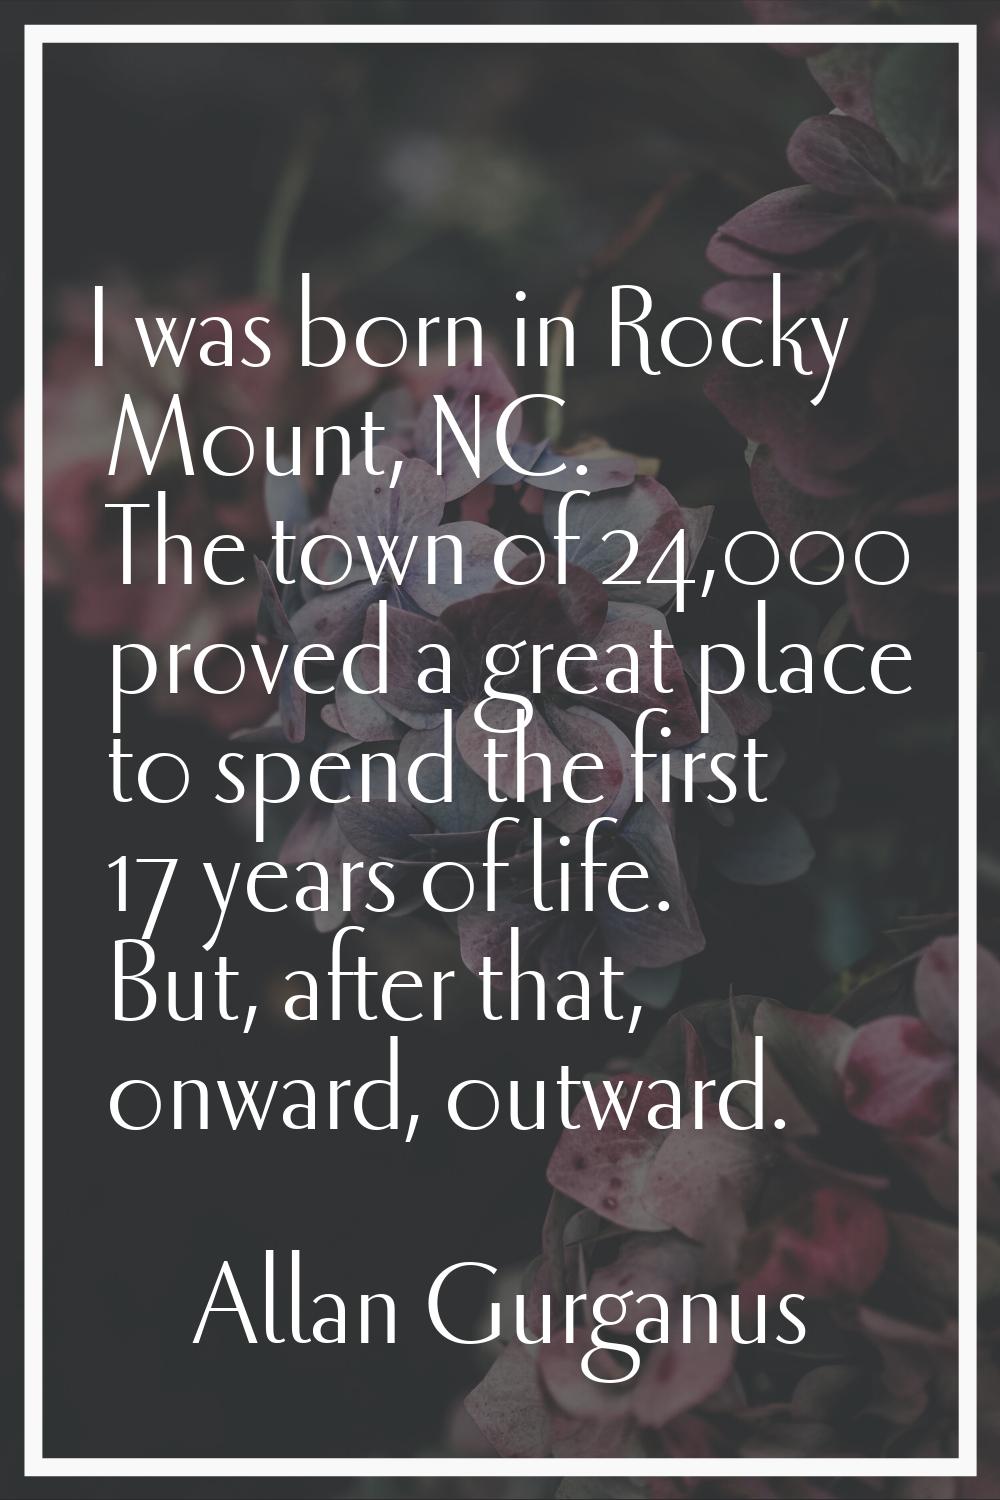 I was born in Rocky Mount, NC. The town of 24,000 proved a great place to spend the first 17 years 